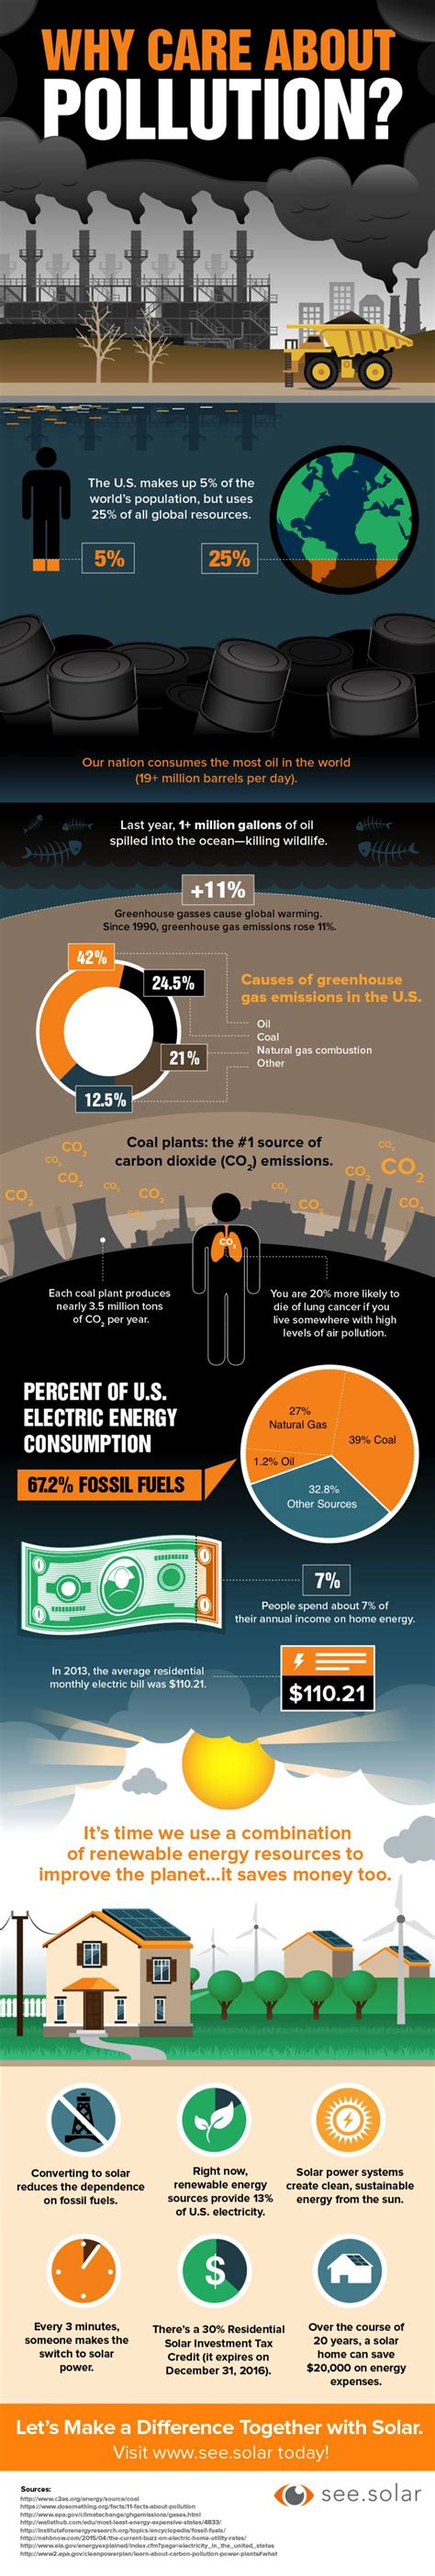 Why Care About Pollution Infographic 네러티브 참고 Pollution